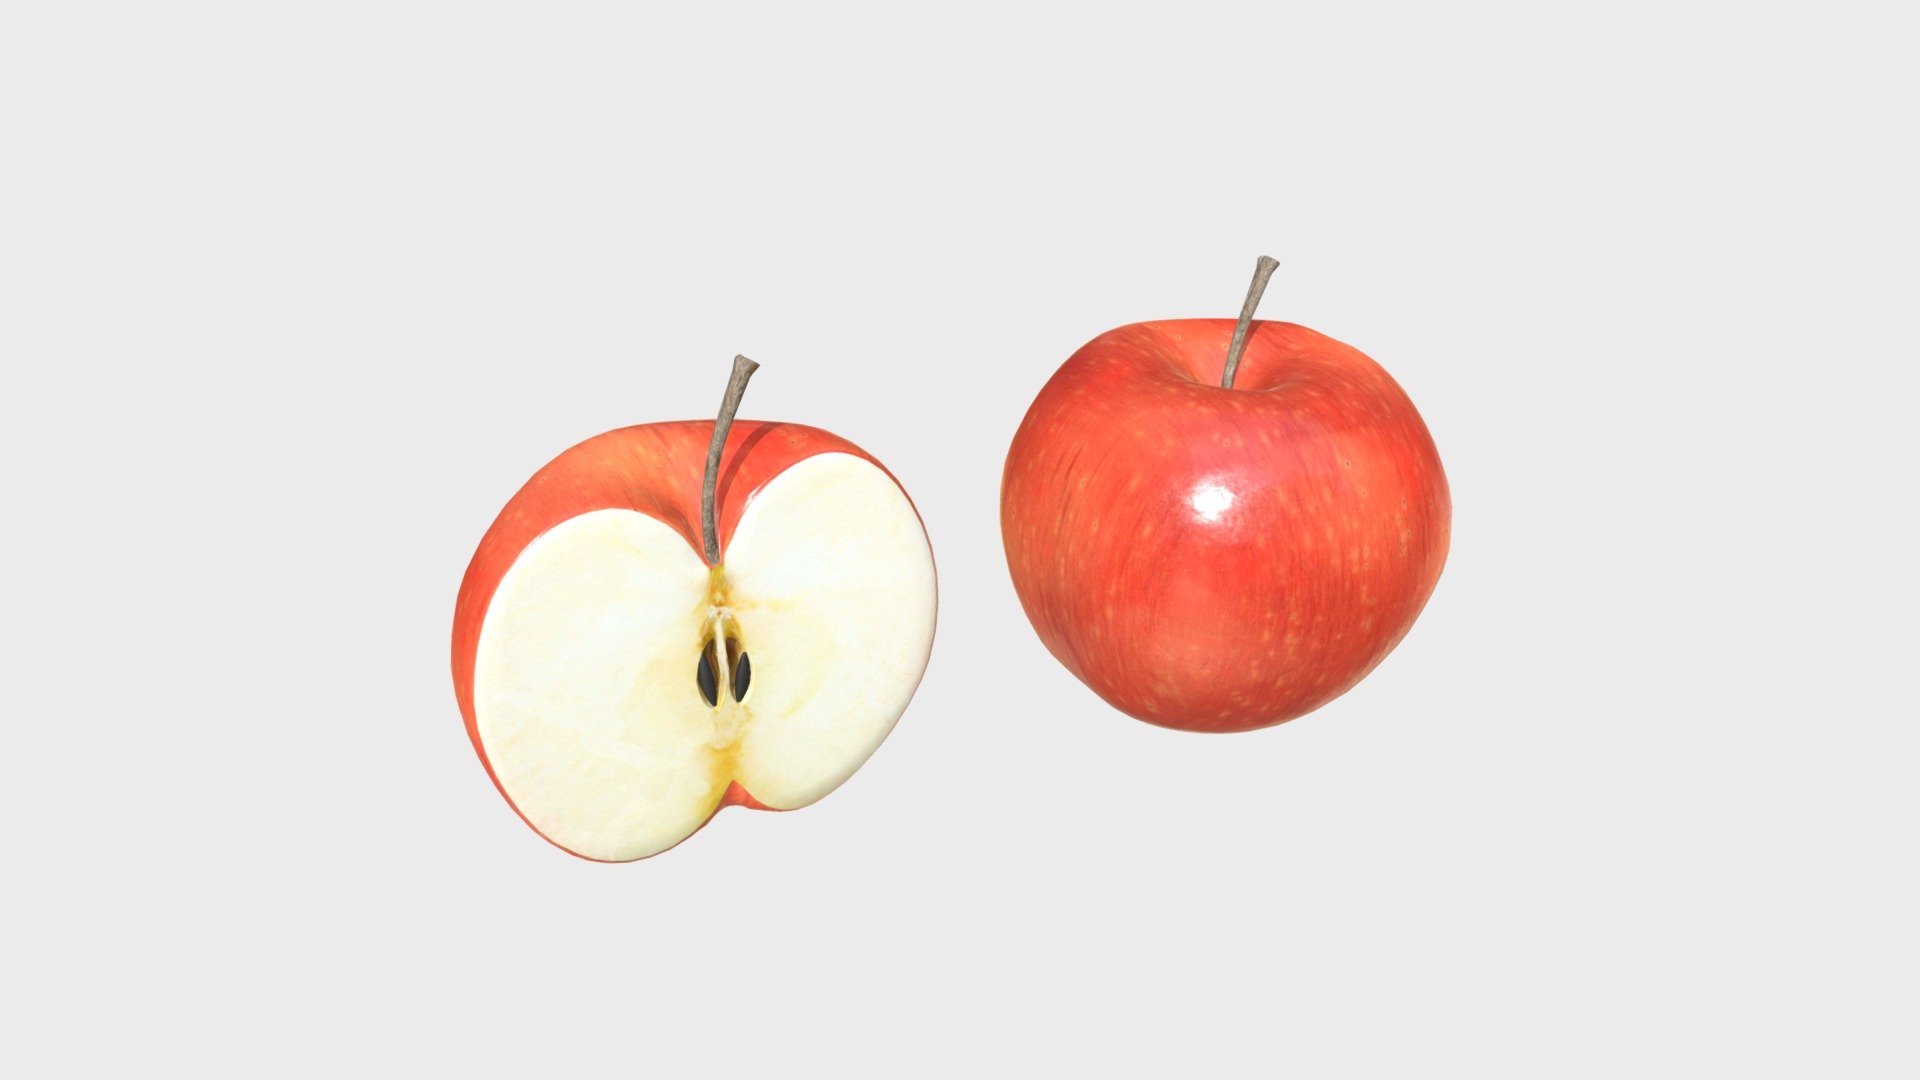 === The following description refers to the additional ZIP package provided with this model ===

Red apples 3D Model. 2 individual objects (whole apple, half apple), sharing the same non overlapping UV Layout map, Material and PBR Textures set. Production-ready 3D Model, with PBR materials, textures, non overlapping UV Layout map provided in the package.

Quads only geometries (no tris/ngons).

Formats included: FBX, OBJ; scenes: BLEND (with Cycles / Eevee PBR Materials and Textures); other: 16-bit PNGs with Alpha.

2 Objects (meshes), 1 PBR Material, UV unwrapped (non overlapping UV Layout map provided in the package); UV-mapped Textures.

UV Layout maps and Image Textures resolutions: 2048x2048; PBR Textures made with Substance Painter.

Polygonal, QUADS ONLY (no tris/ngons); 5040 vertices, 5028 quad faces (10056 tris).

Real world dimensions; scene scale units: cm in Blender 3.3 (that is: Metric with 0.01 scale).

Uniform scale object (scale applied in Blender 3.3) 3d model